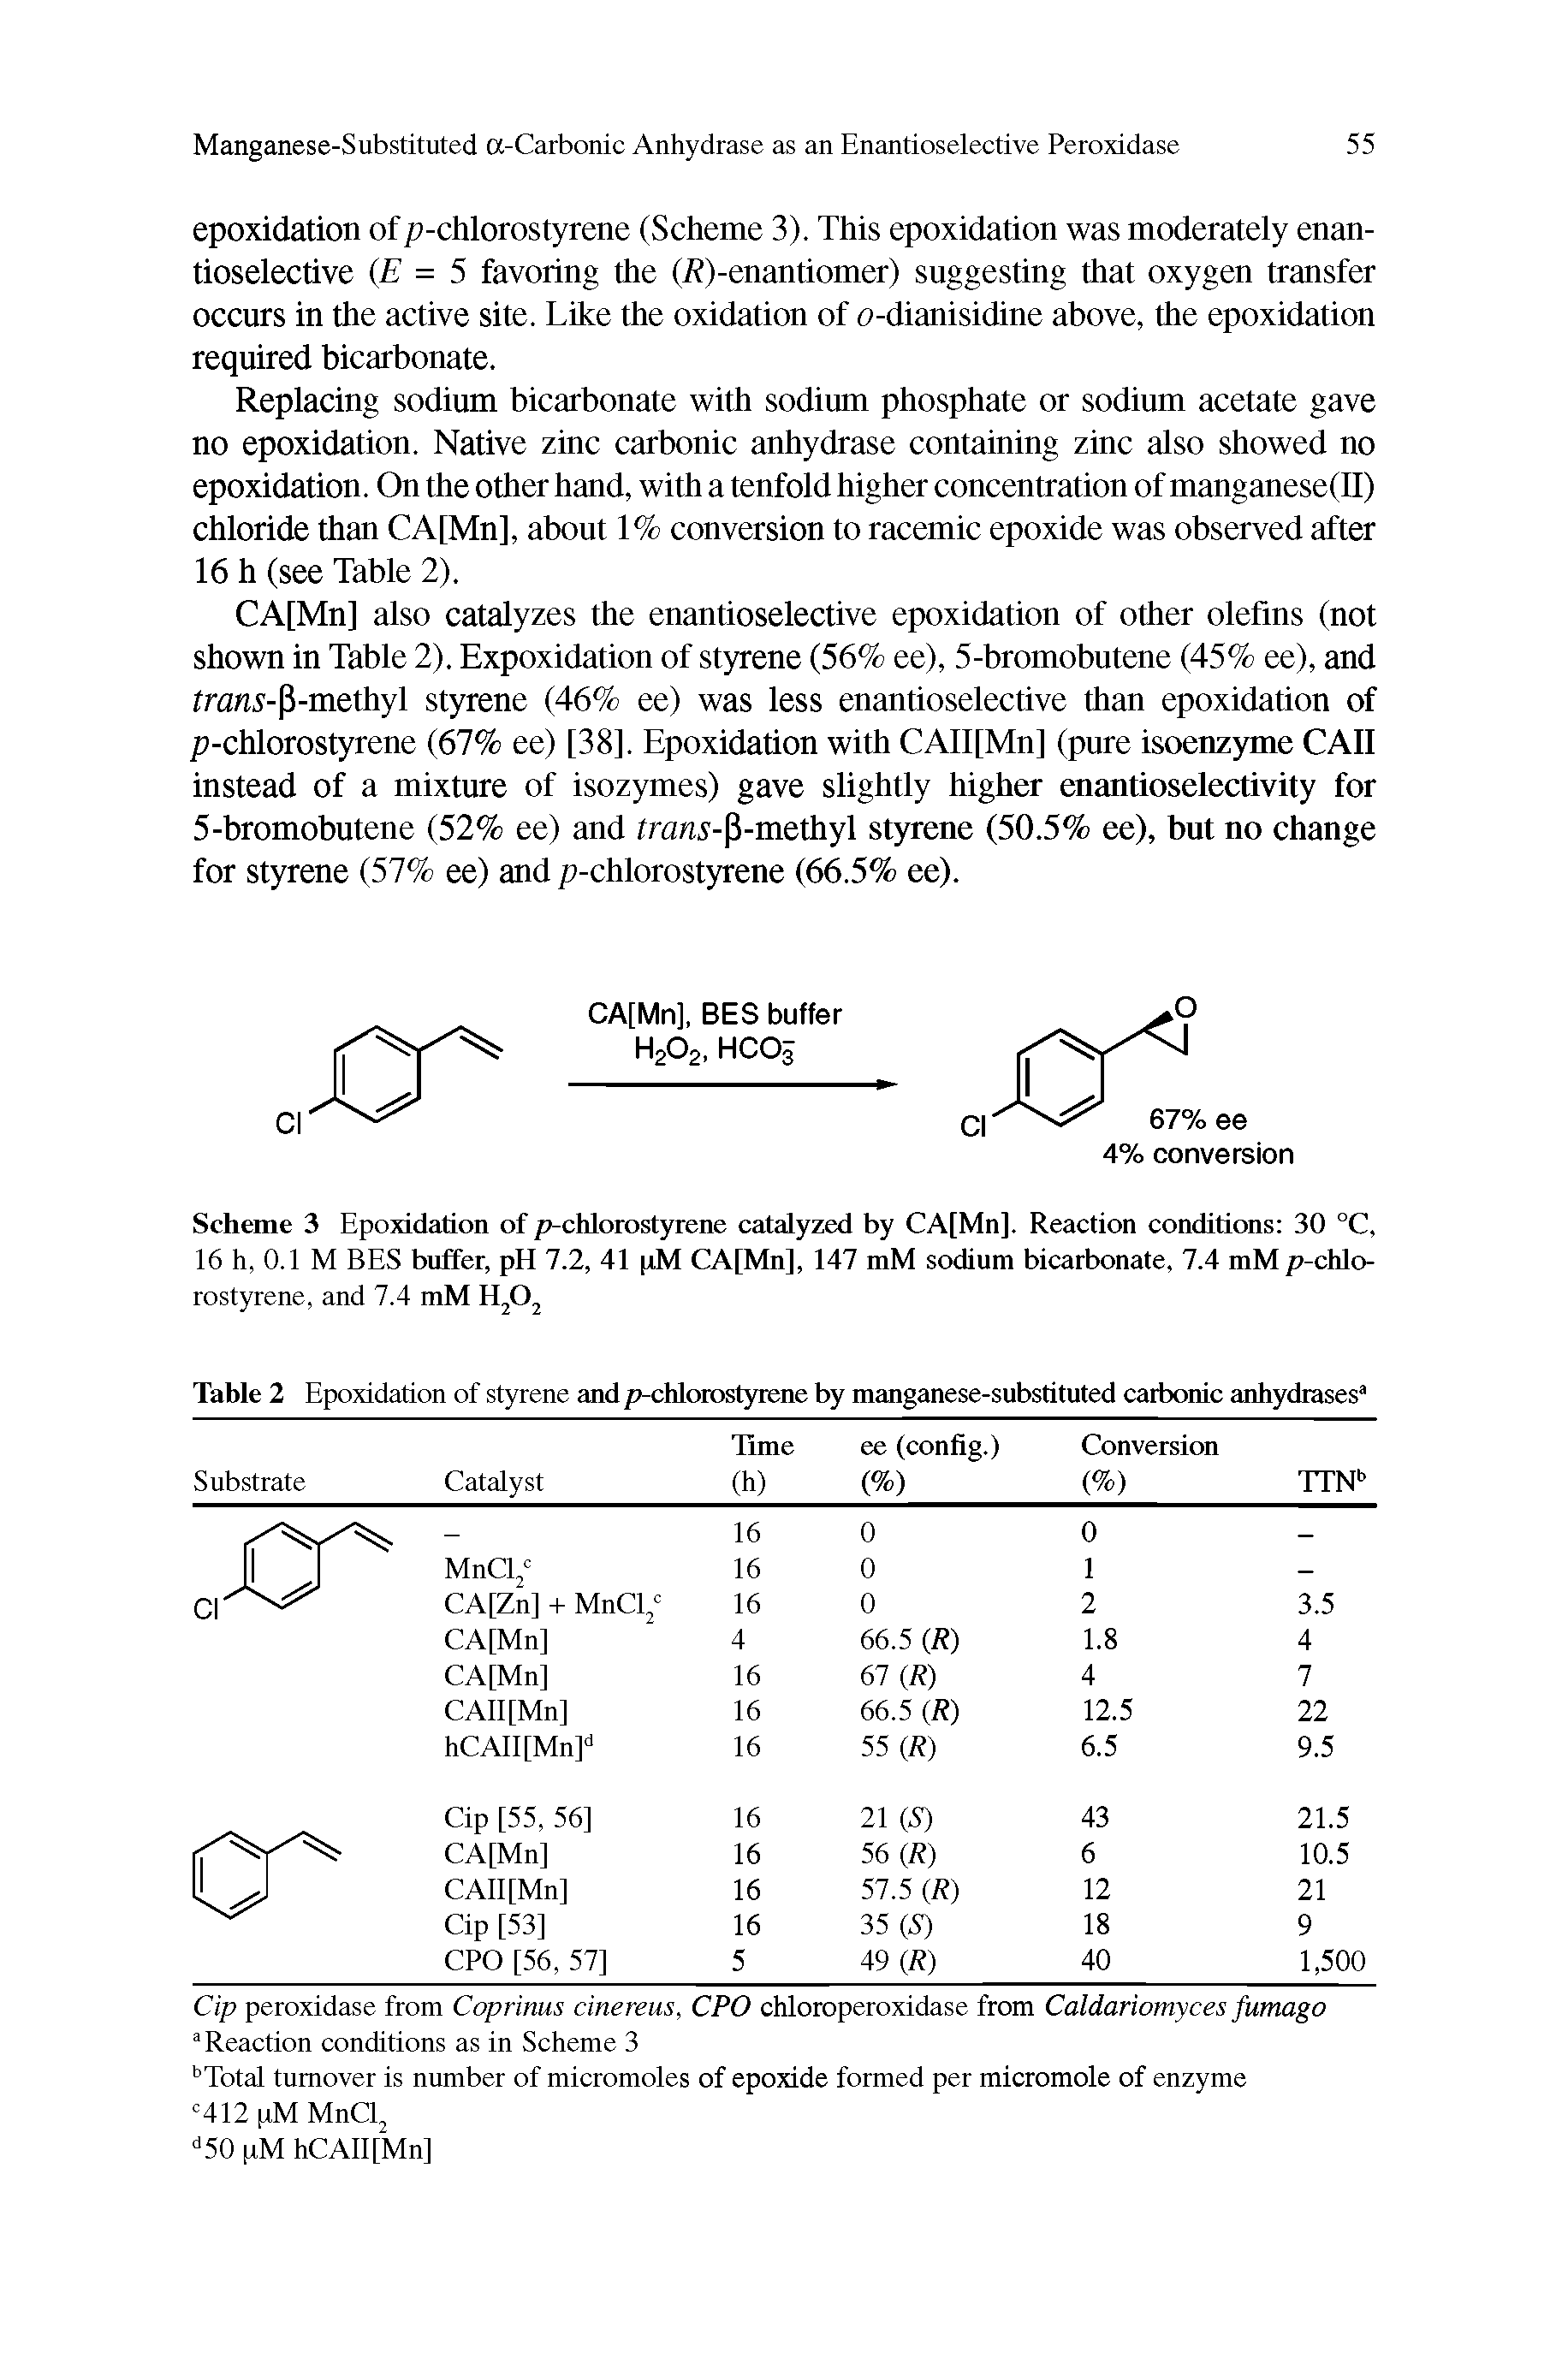 Table 2 Epoxidation of styrene and p-chlorostyrene by manganese-substituted carbonic anhydrases ...